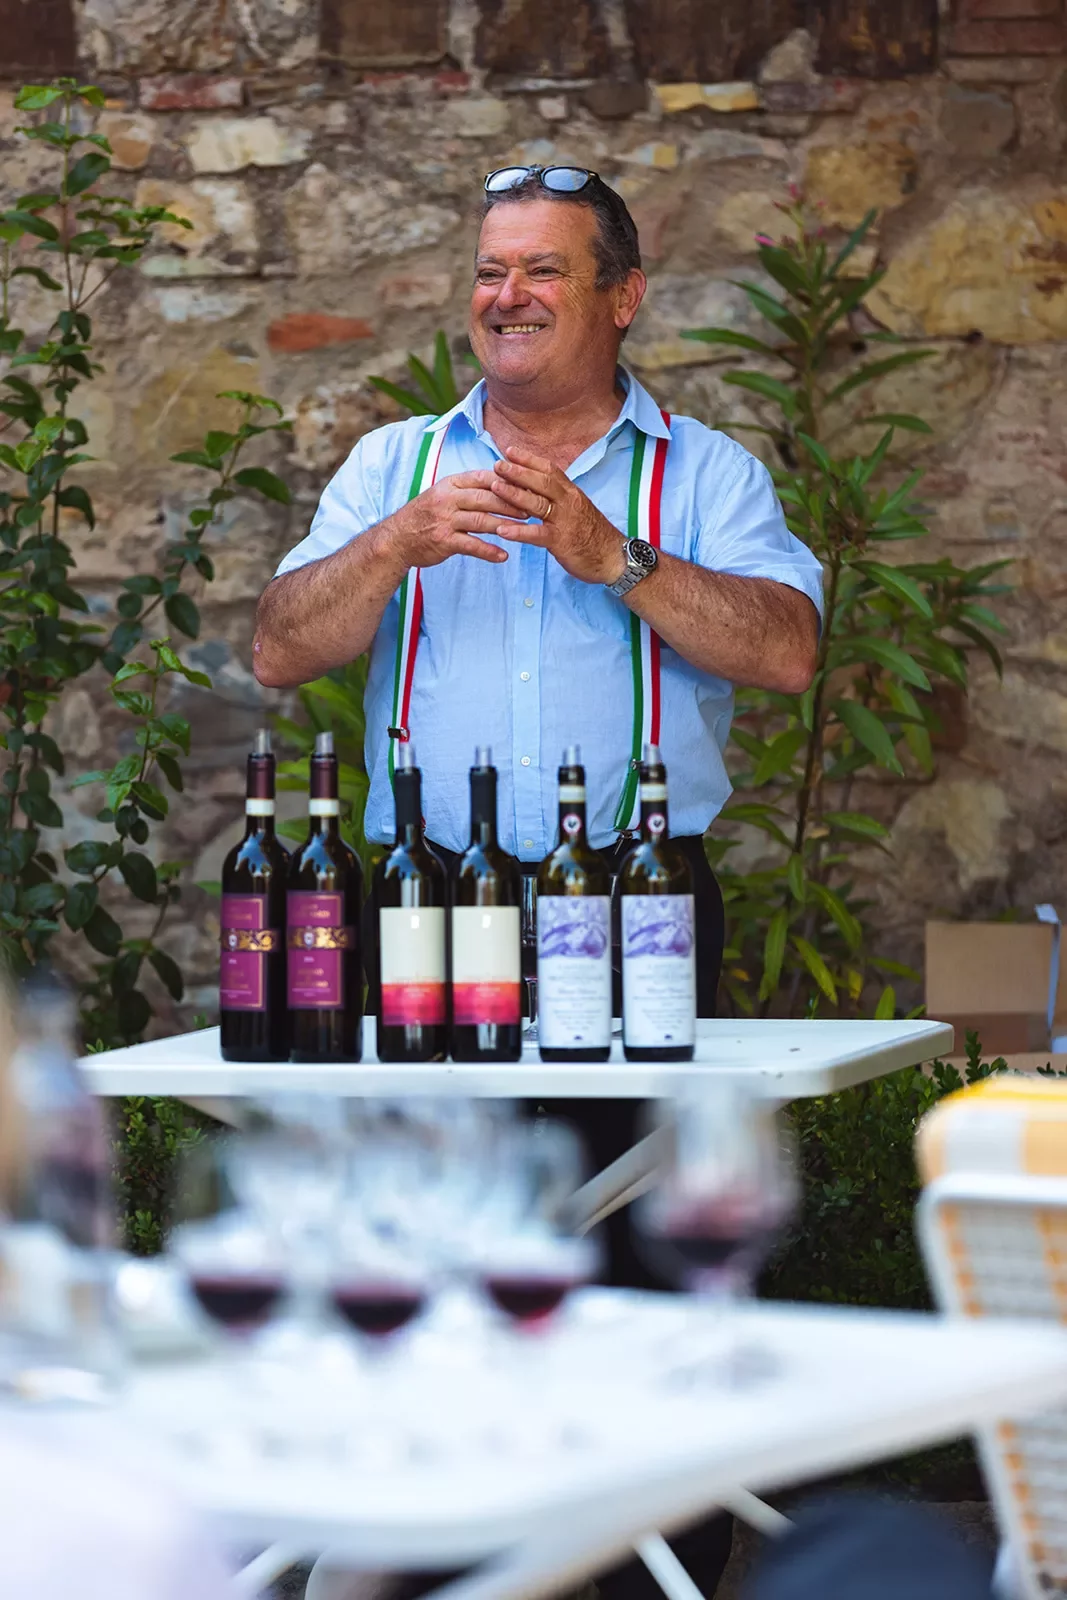 Local guide with assortment of red wines.